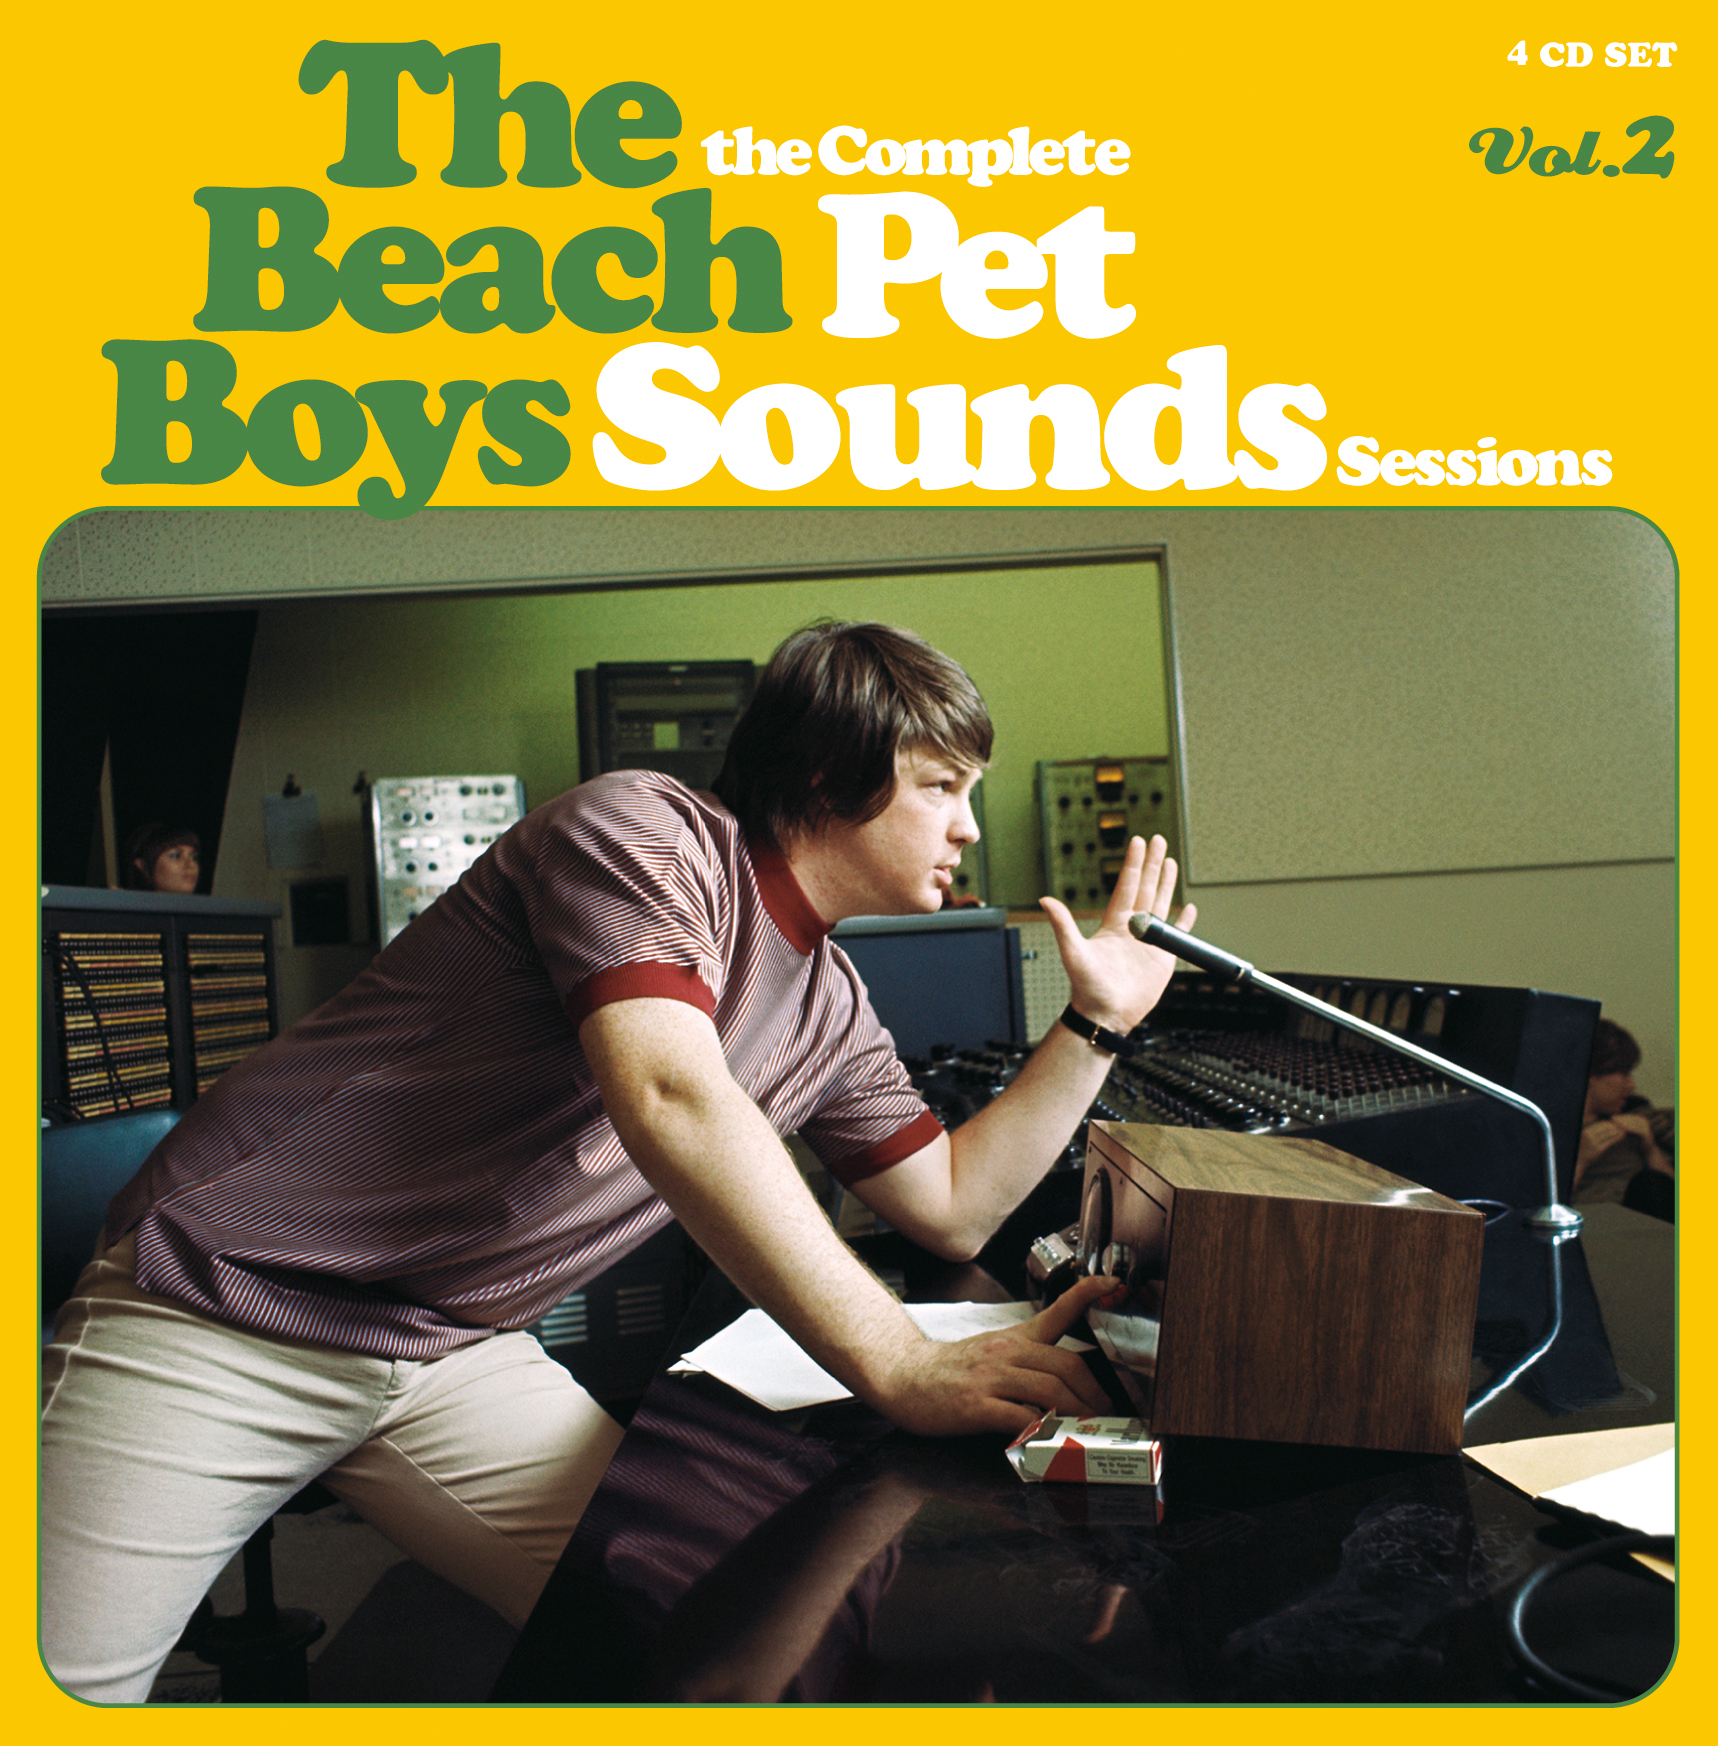 THE BEACH BOYS / the Complete PET SOUNDS Sessions vol.2